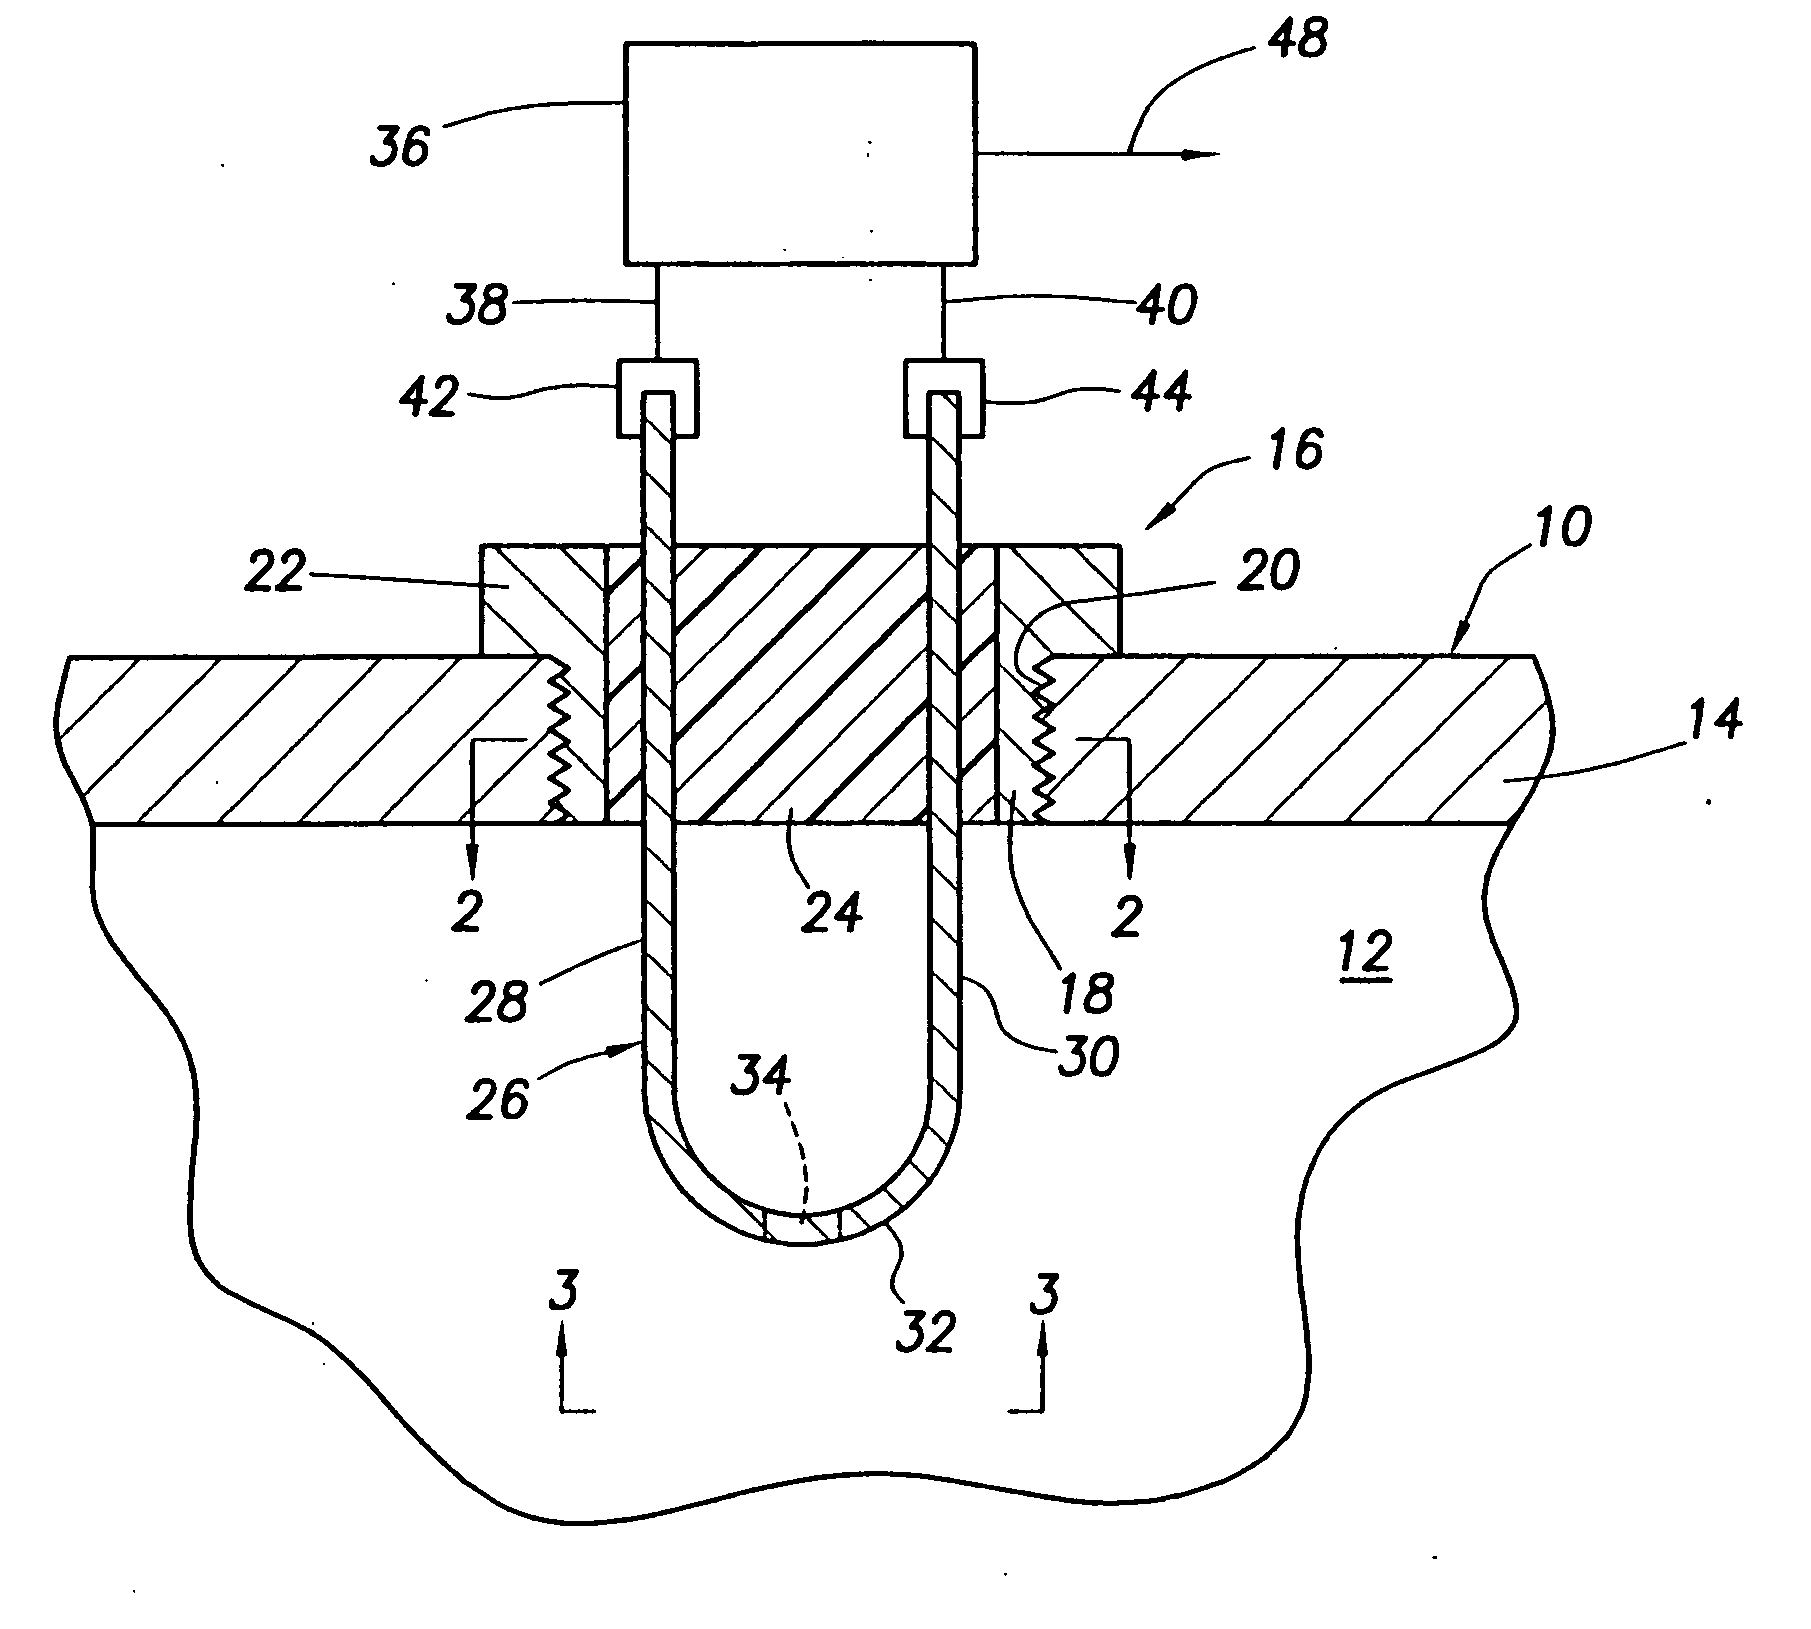 Electrically-based fluid corrosion/erosion protection apparatus and associated methods